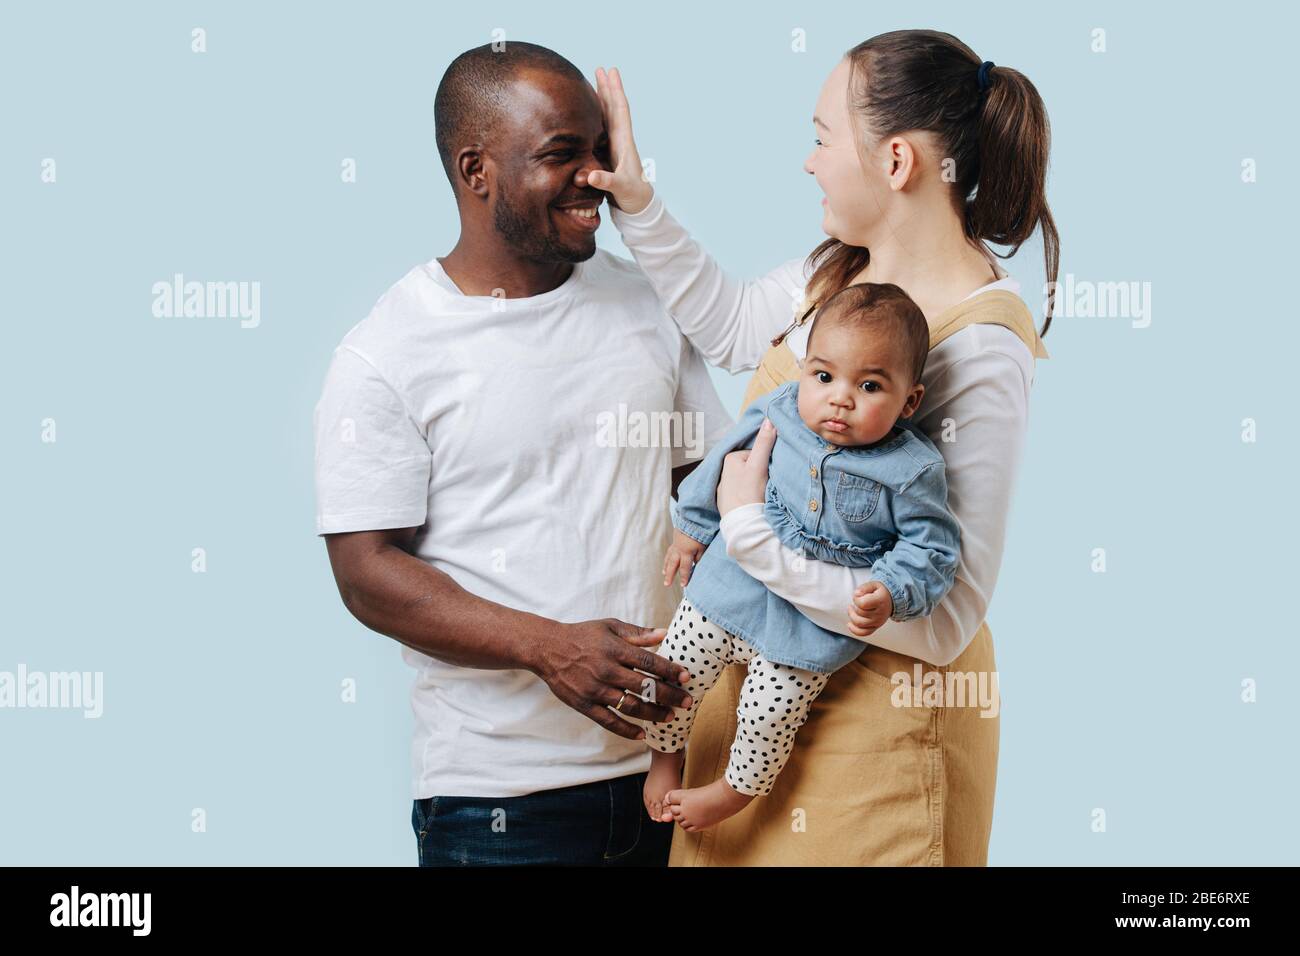 Happy mixed race family interacting with each other, doing silly things Stock Photo